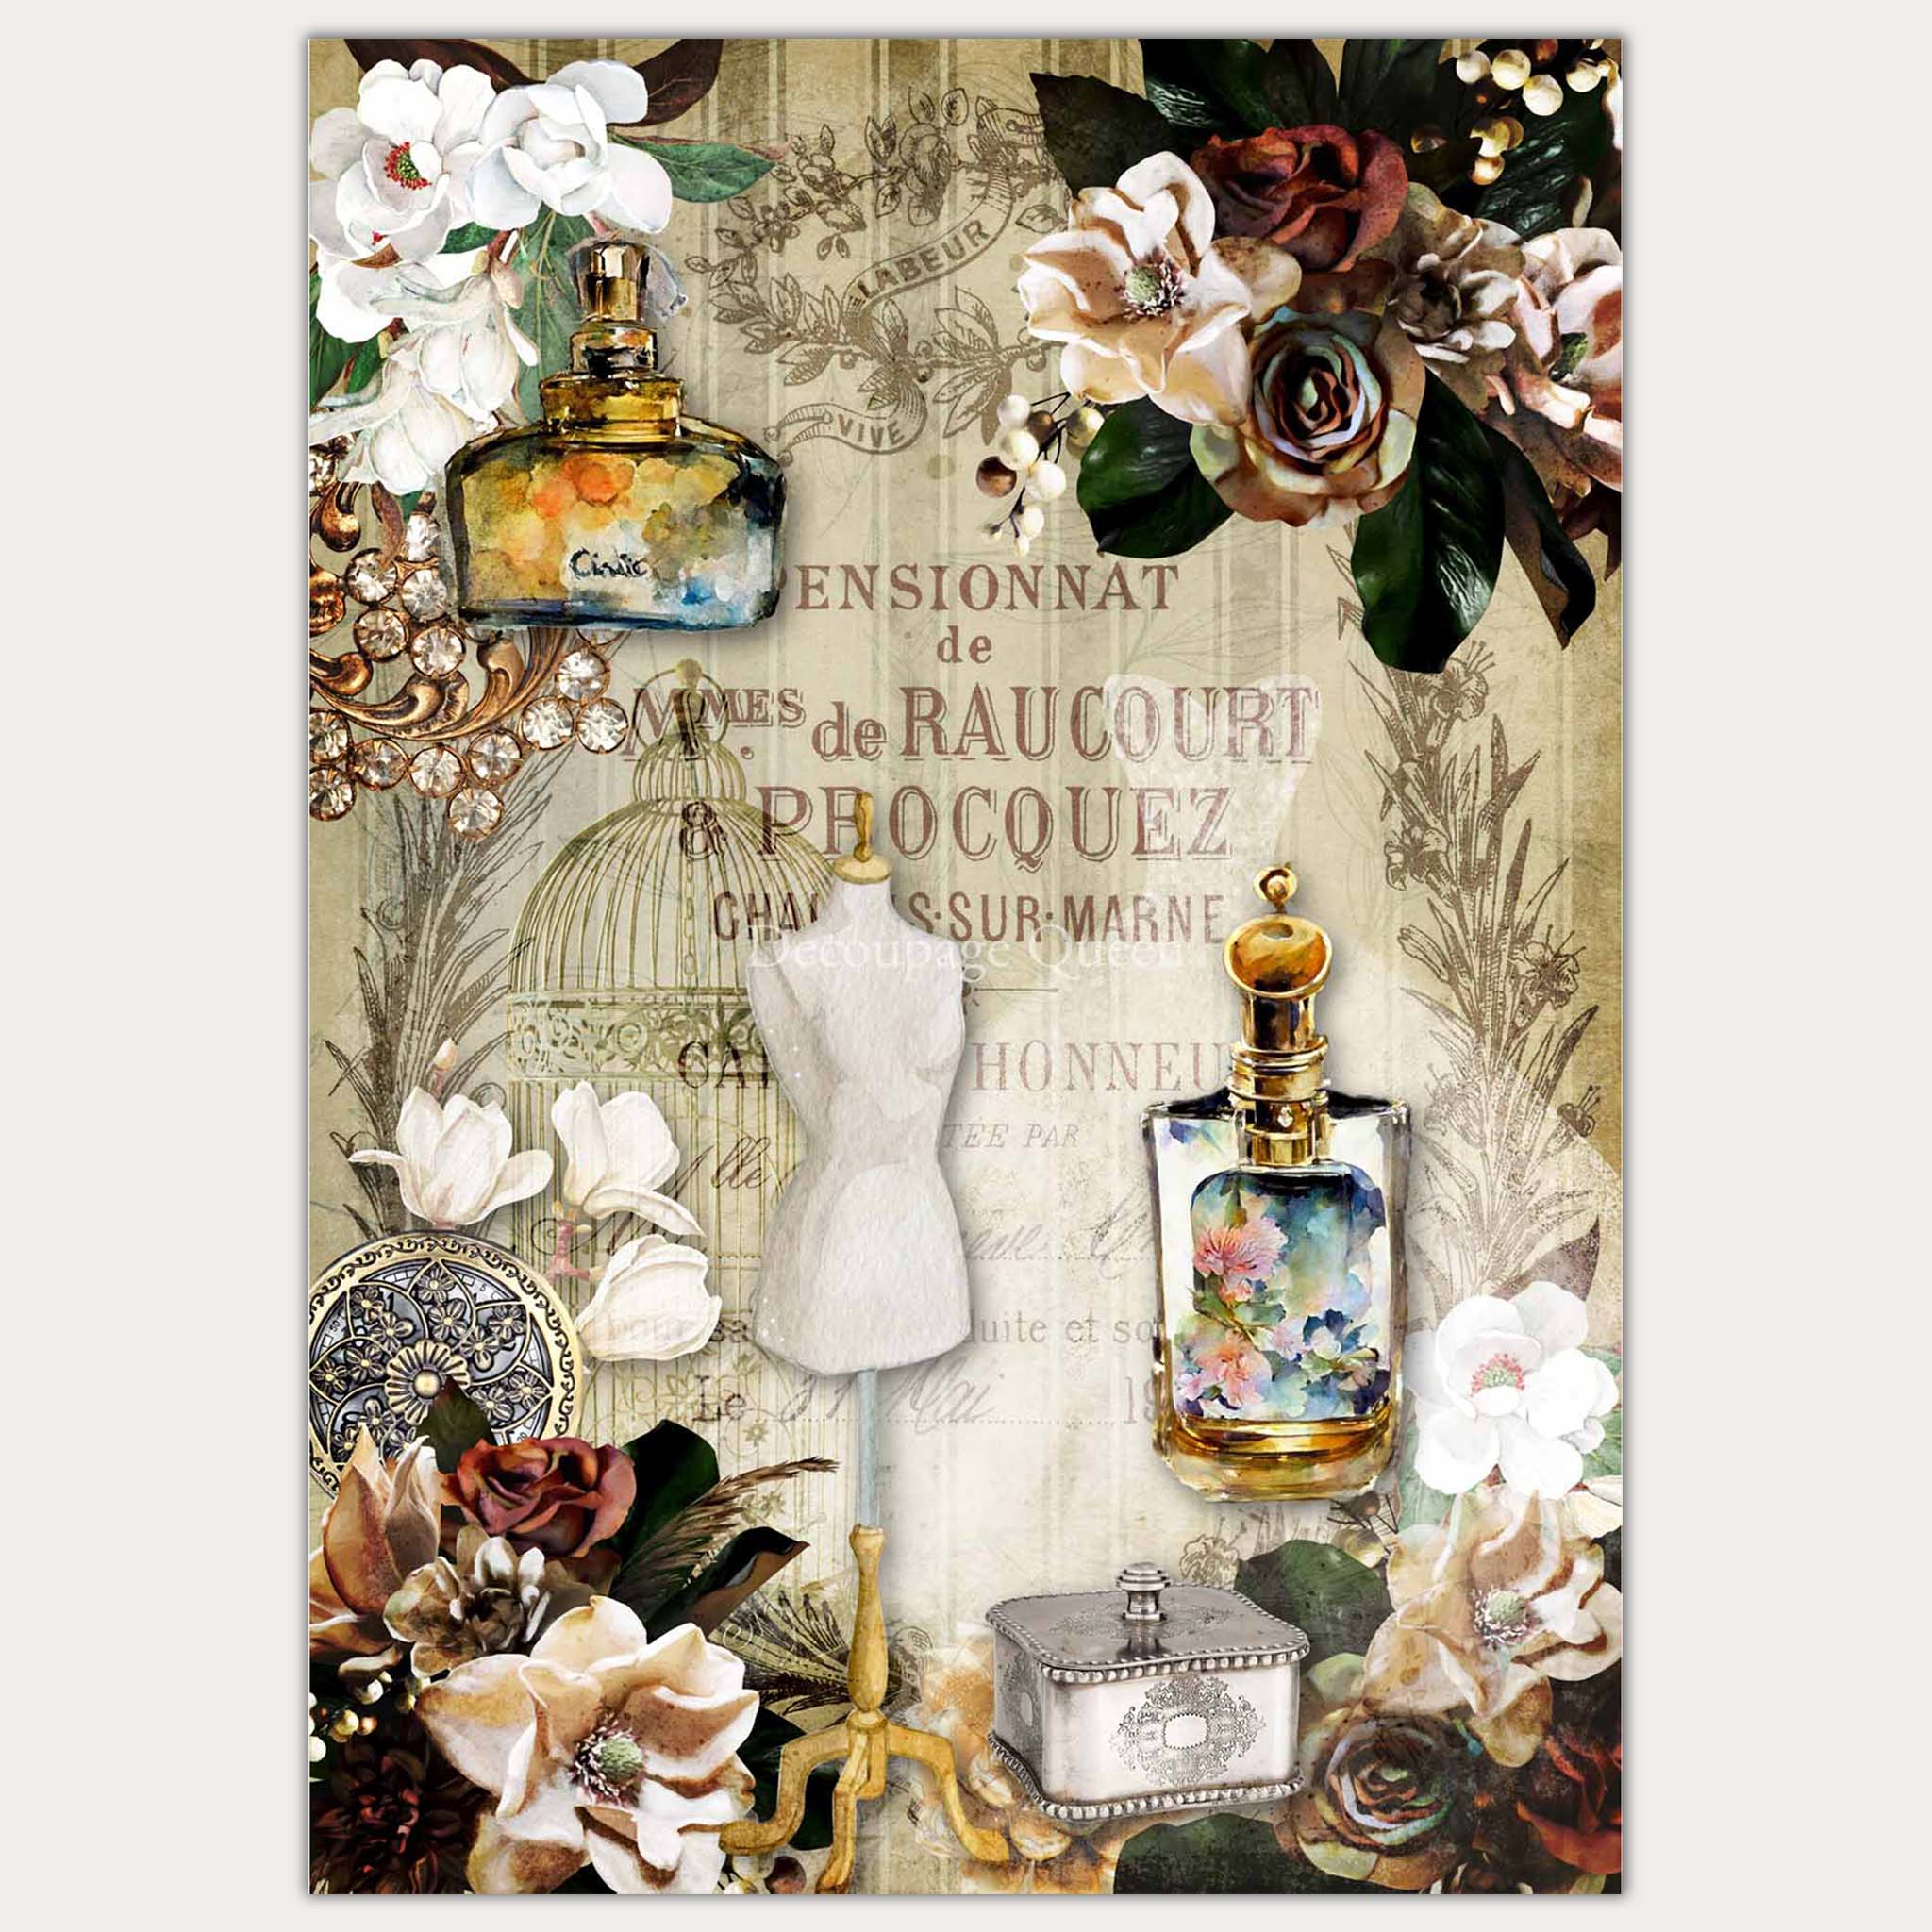 A2 rice paper design that features dark floral bouquets in the corners, bottles of vintage perfumes, and a dress form on a background of vintage wallpaper with French print. White borders are on the sides.